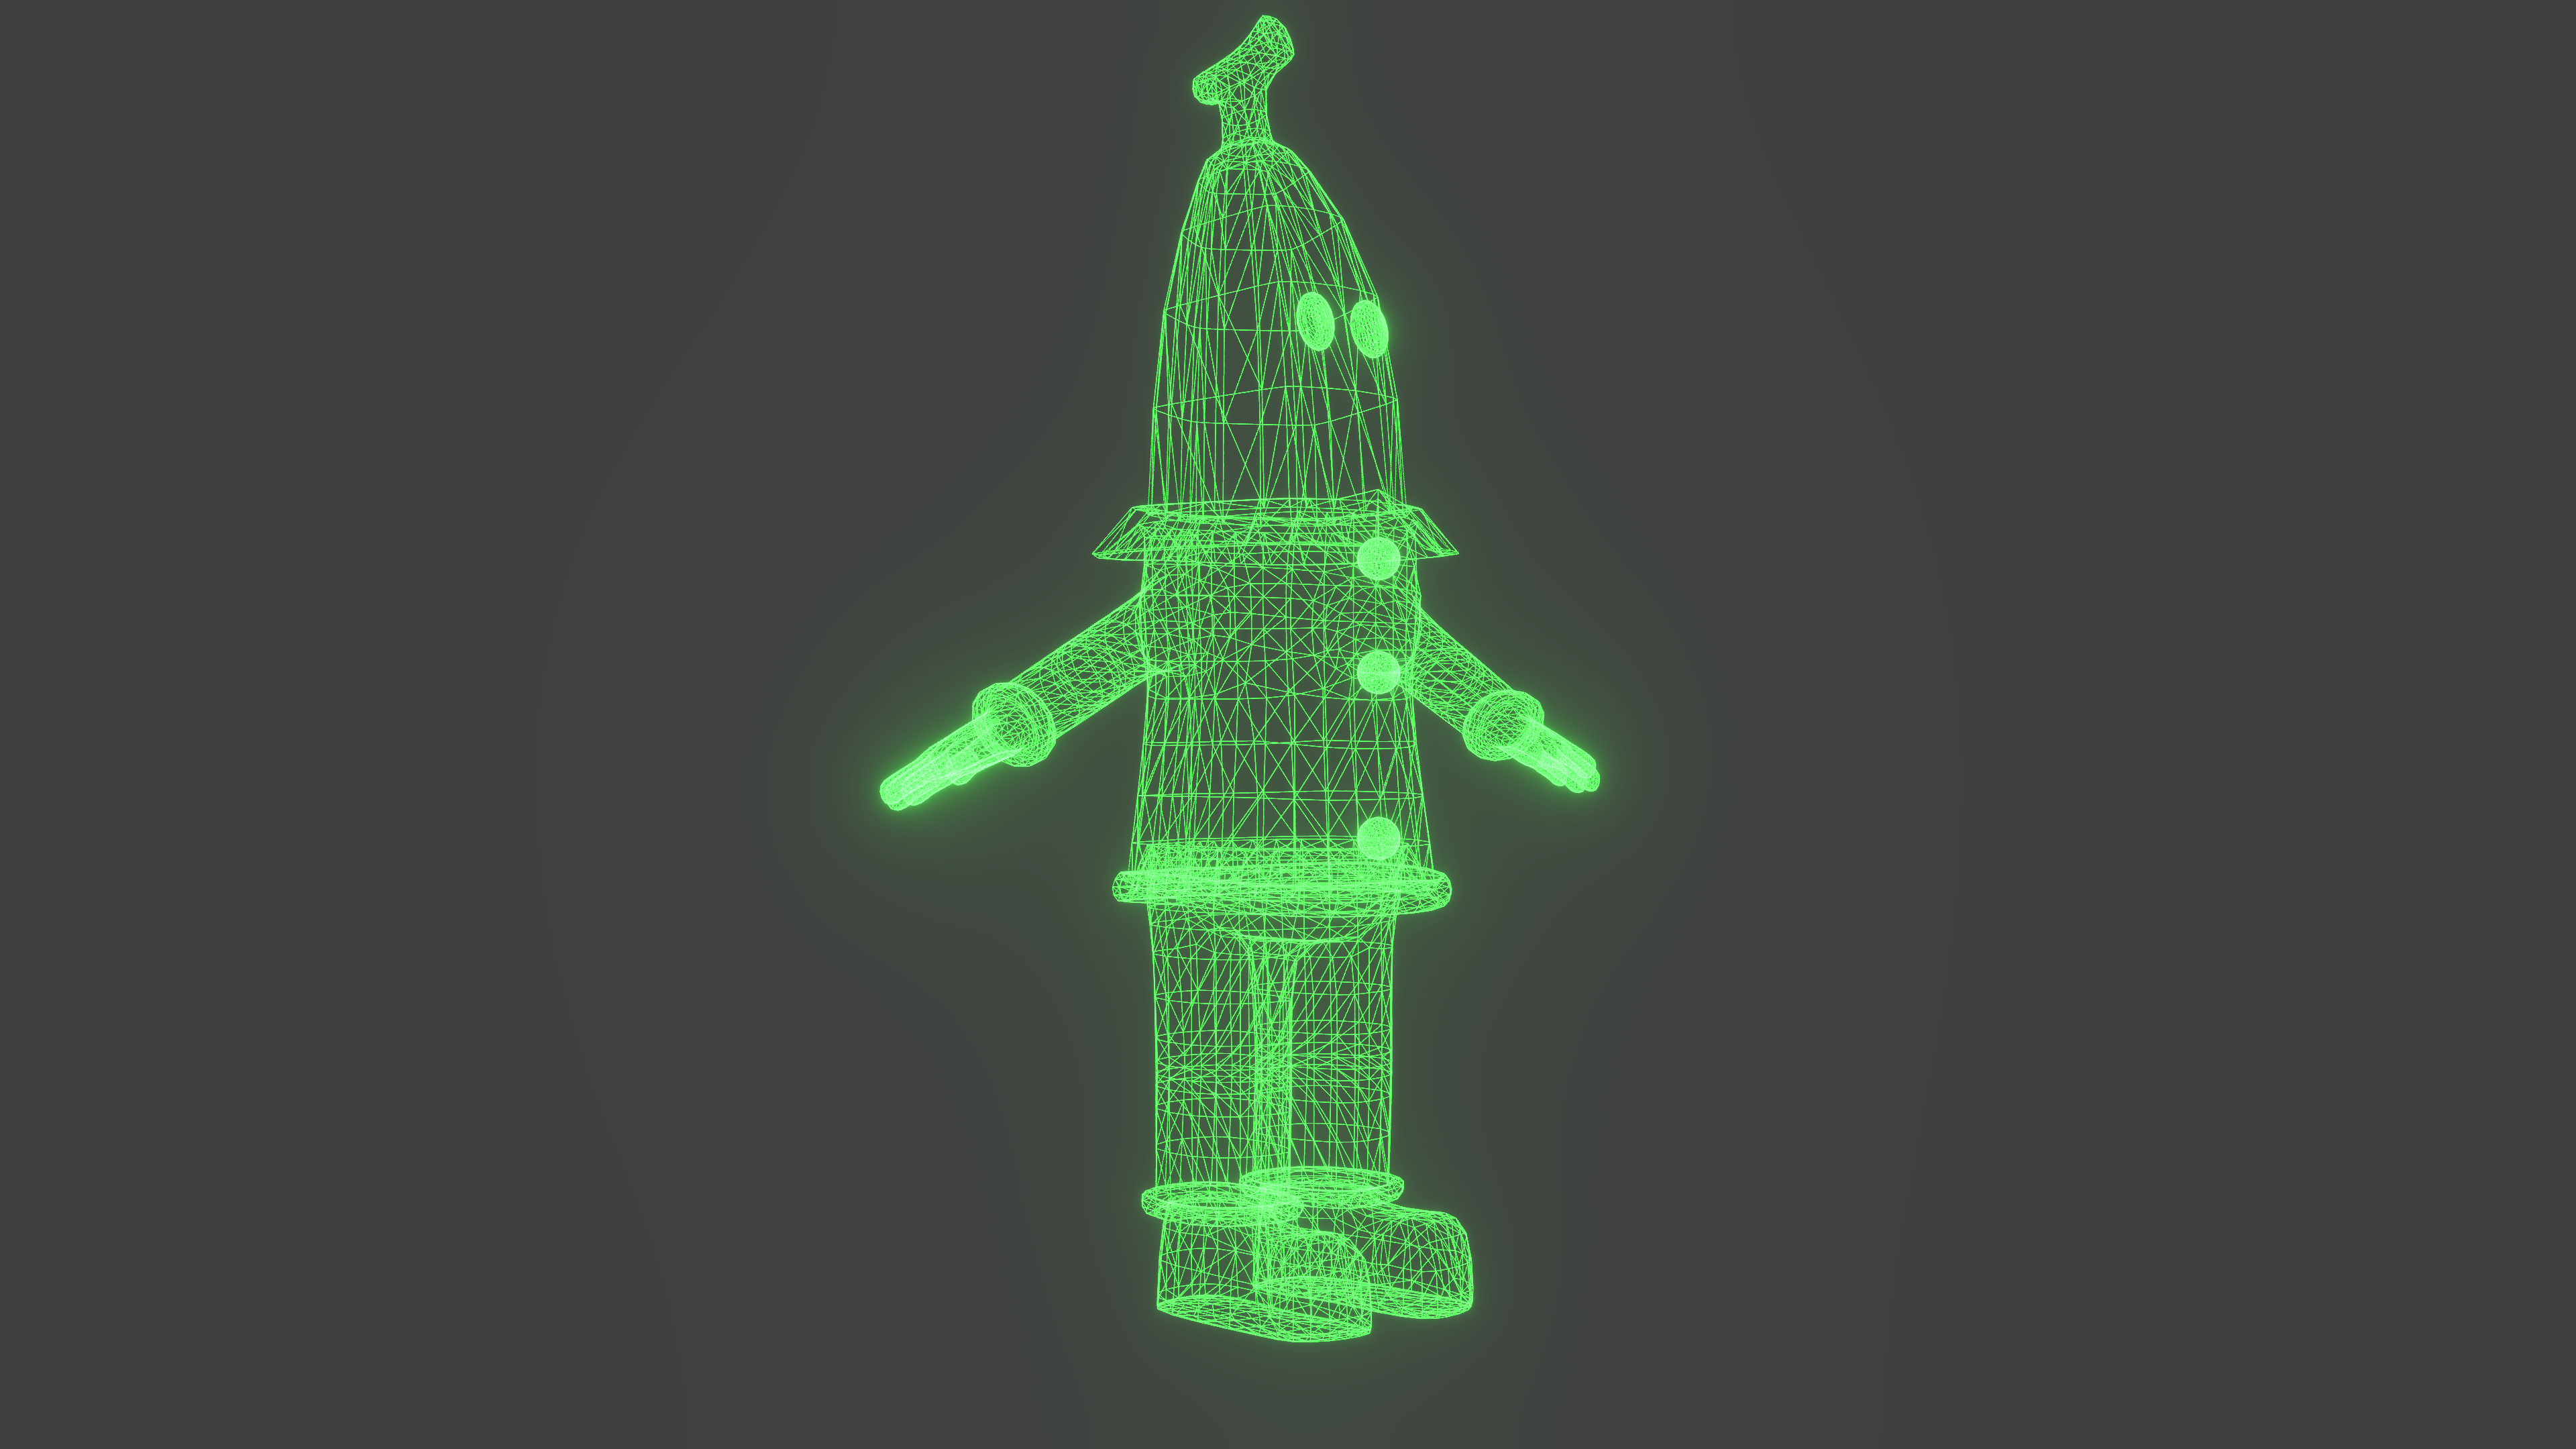 Green and glowy wireframe, so you know it's from a 1990s show reel on the world's first CGI cartoon.